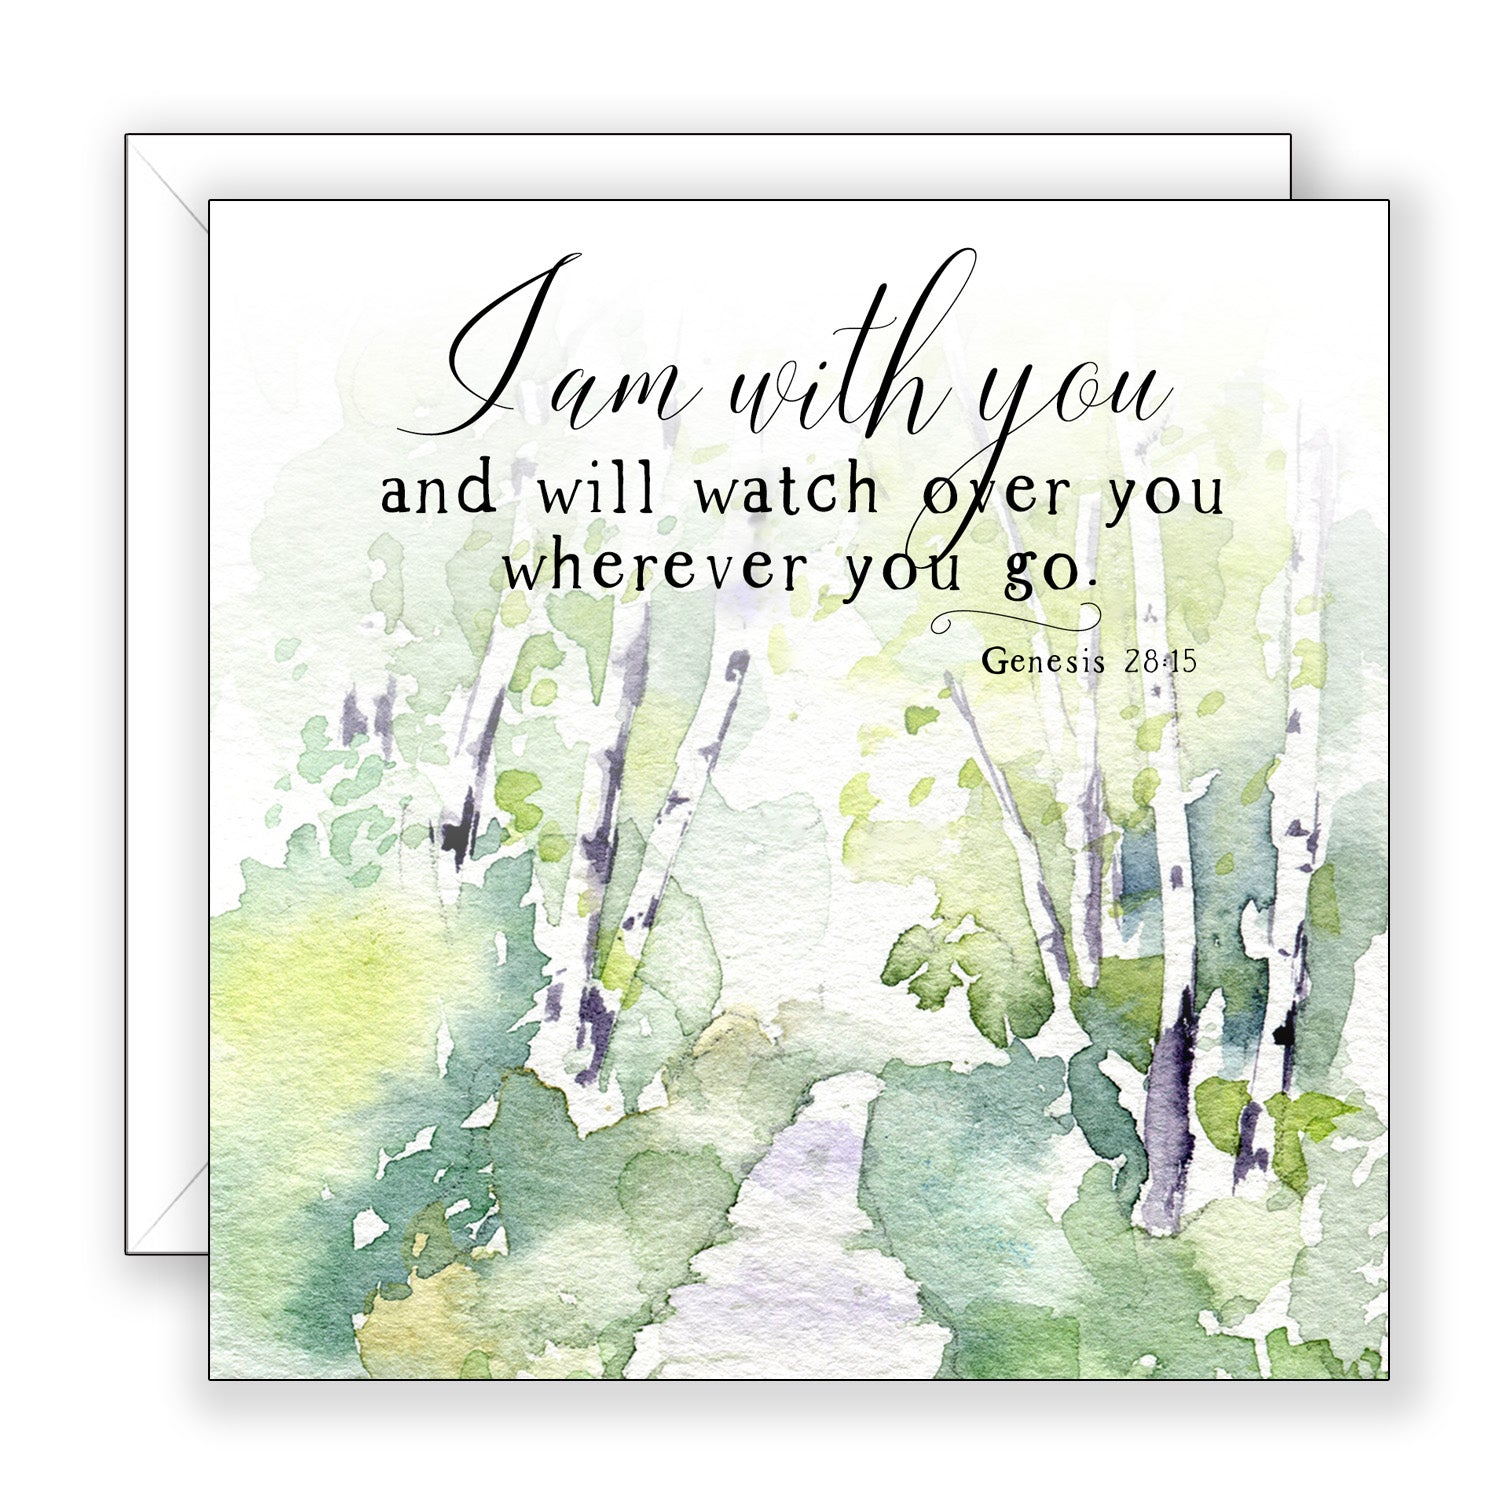 I Am With You (Genesis 28:15) - Encouragement Card